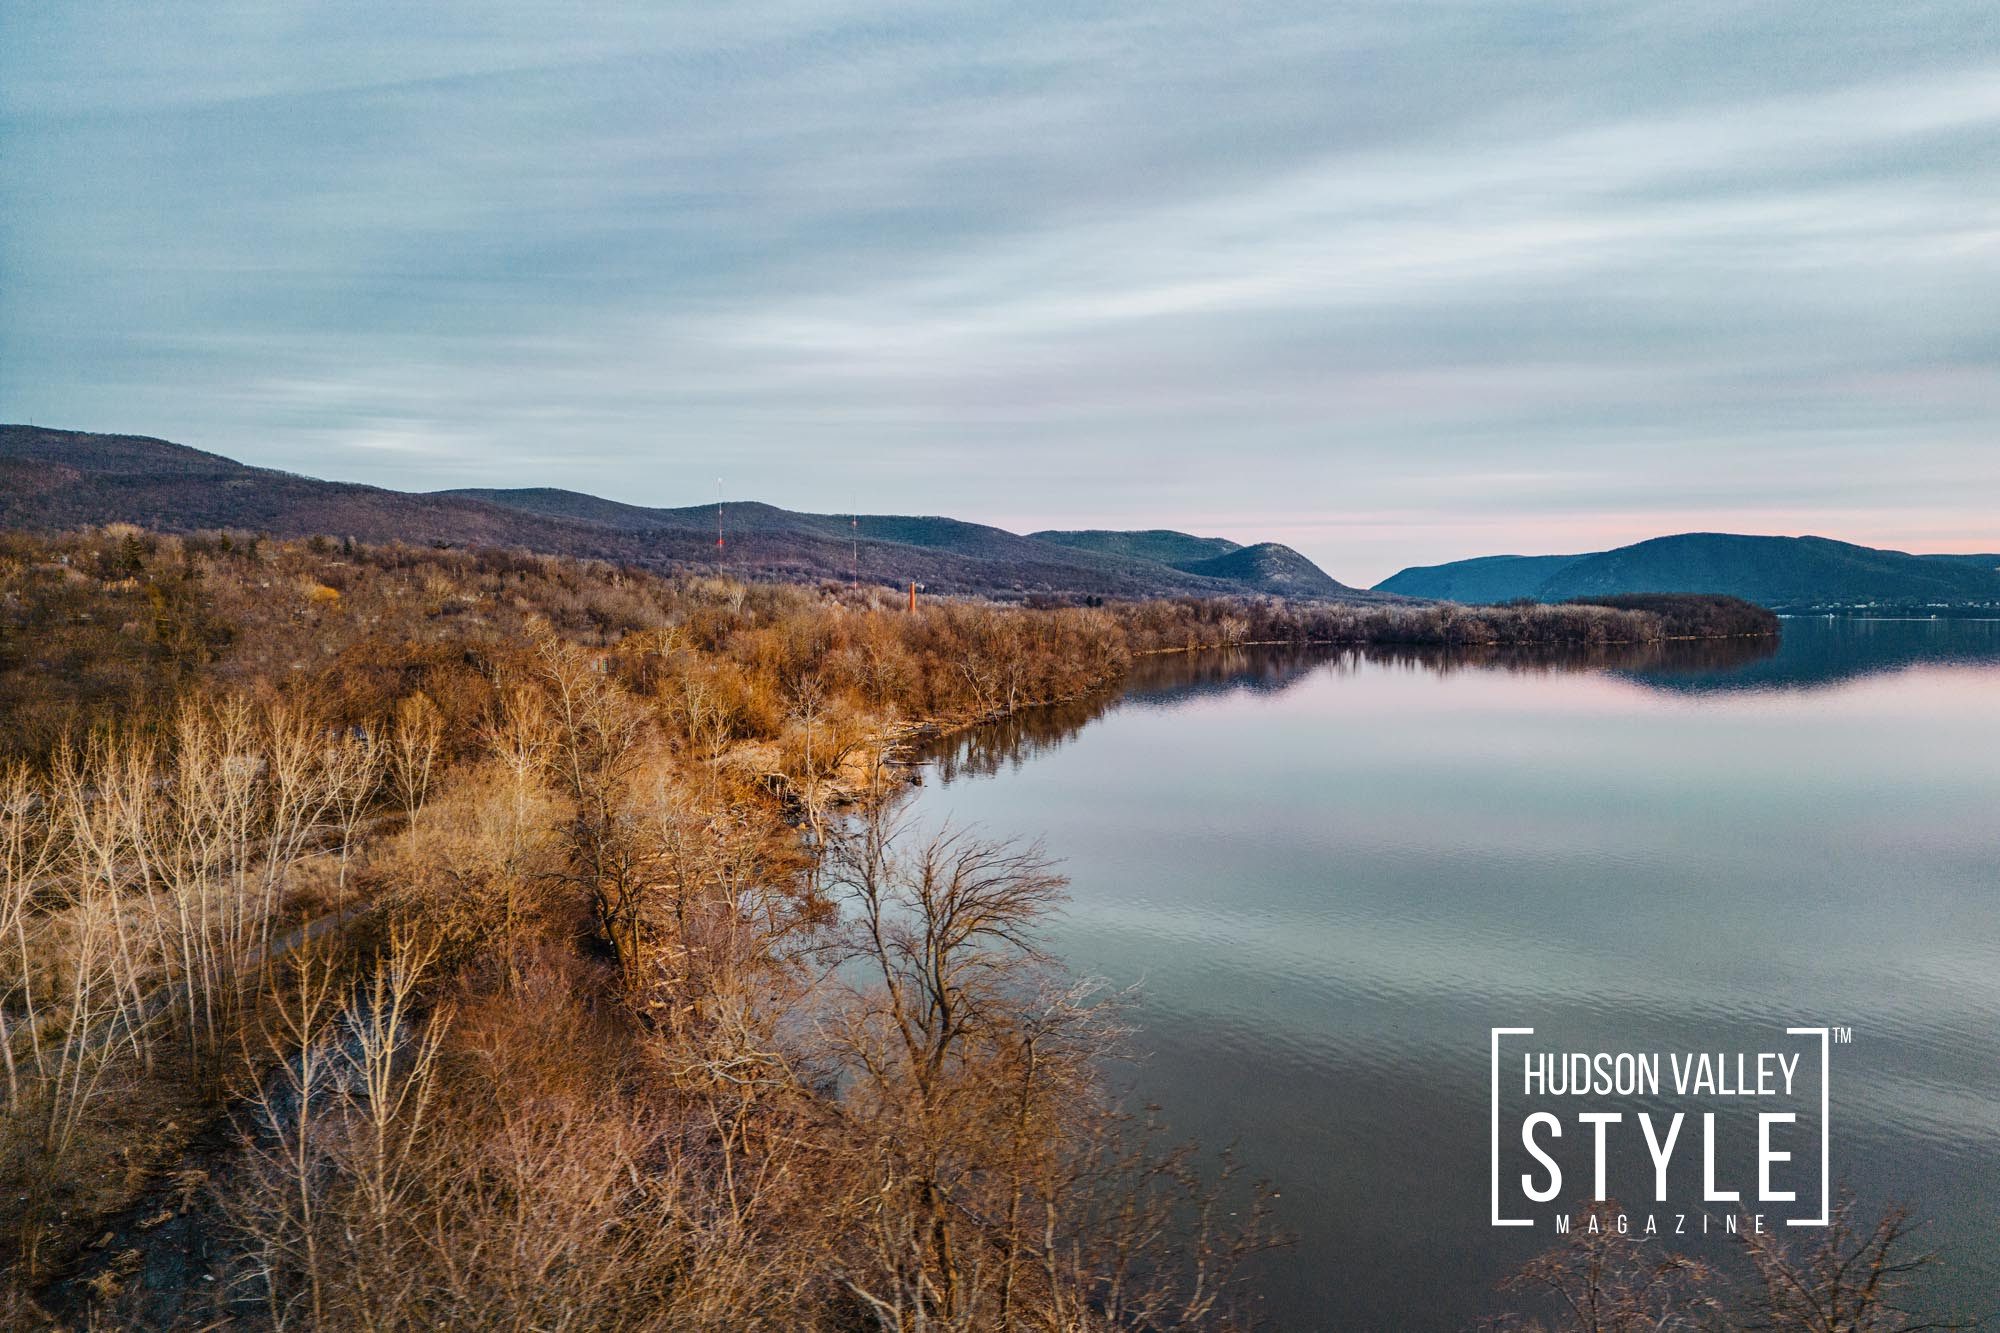 Chasing the Magic of Hudson Valley Sunsets: A Photographic Journey at Long Dock Park in Beacon, NY – Exploring Hudson Valley with Photographer Maxwell Alexander